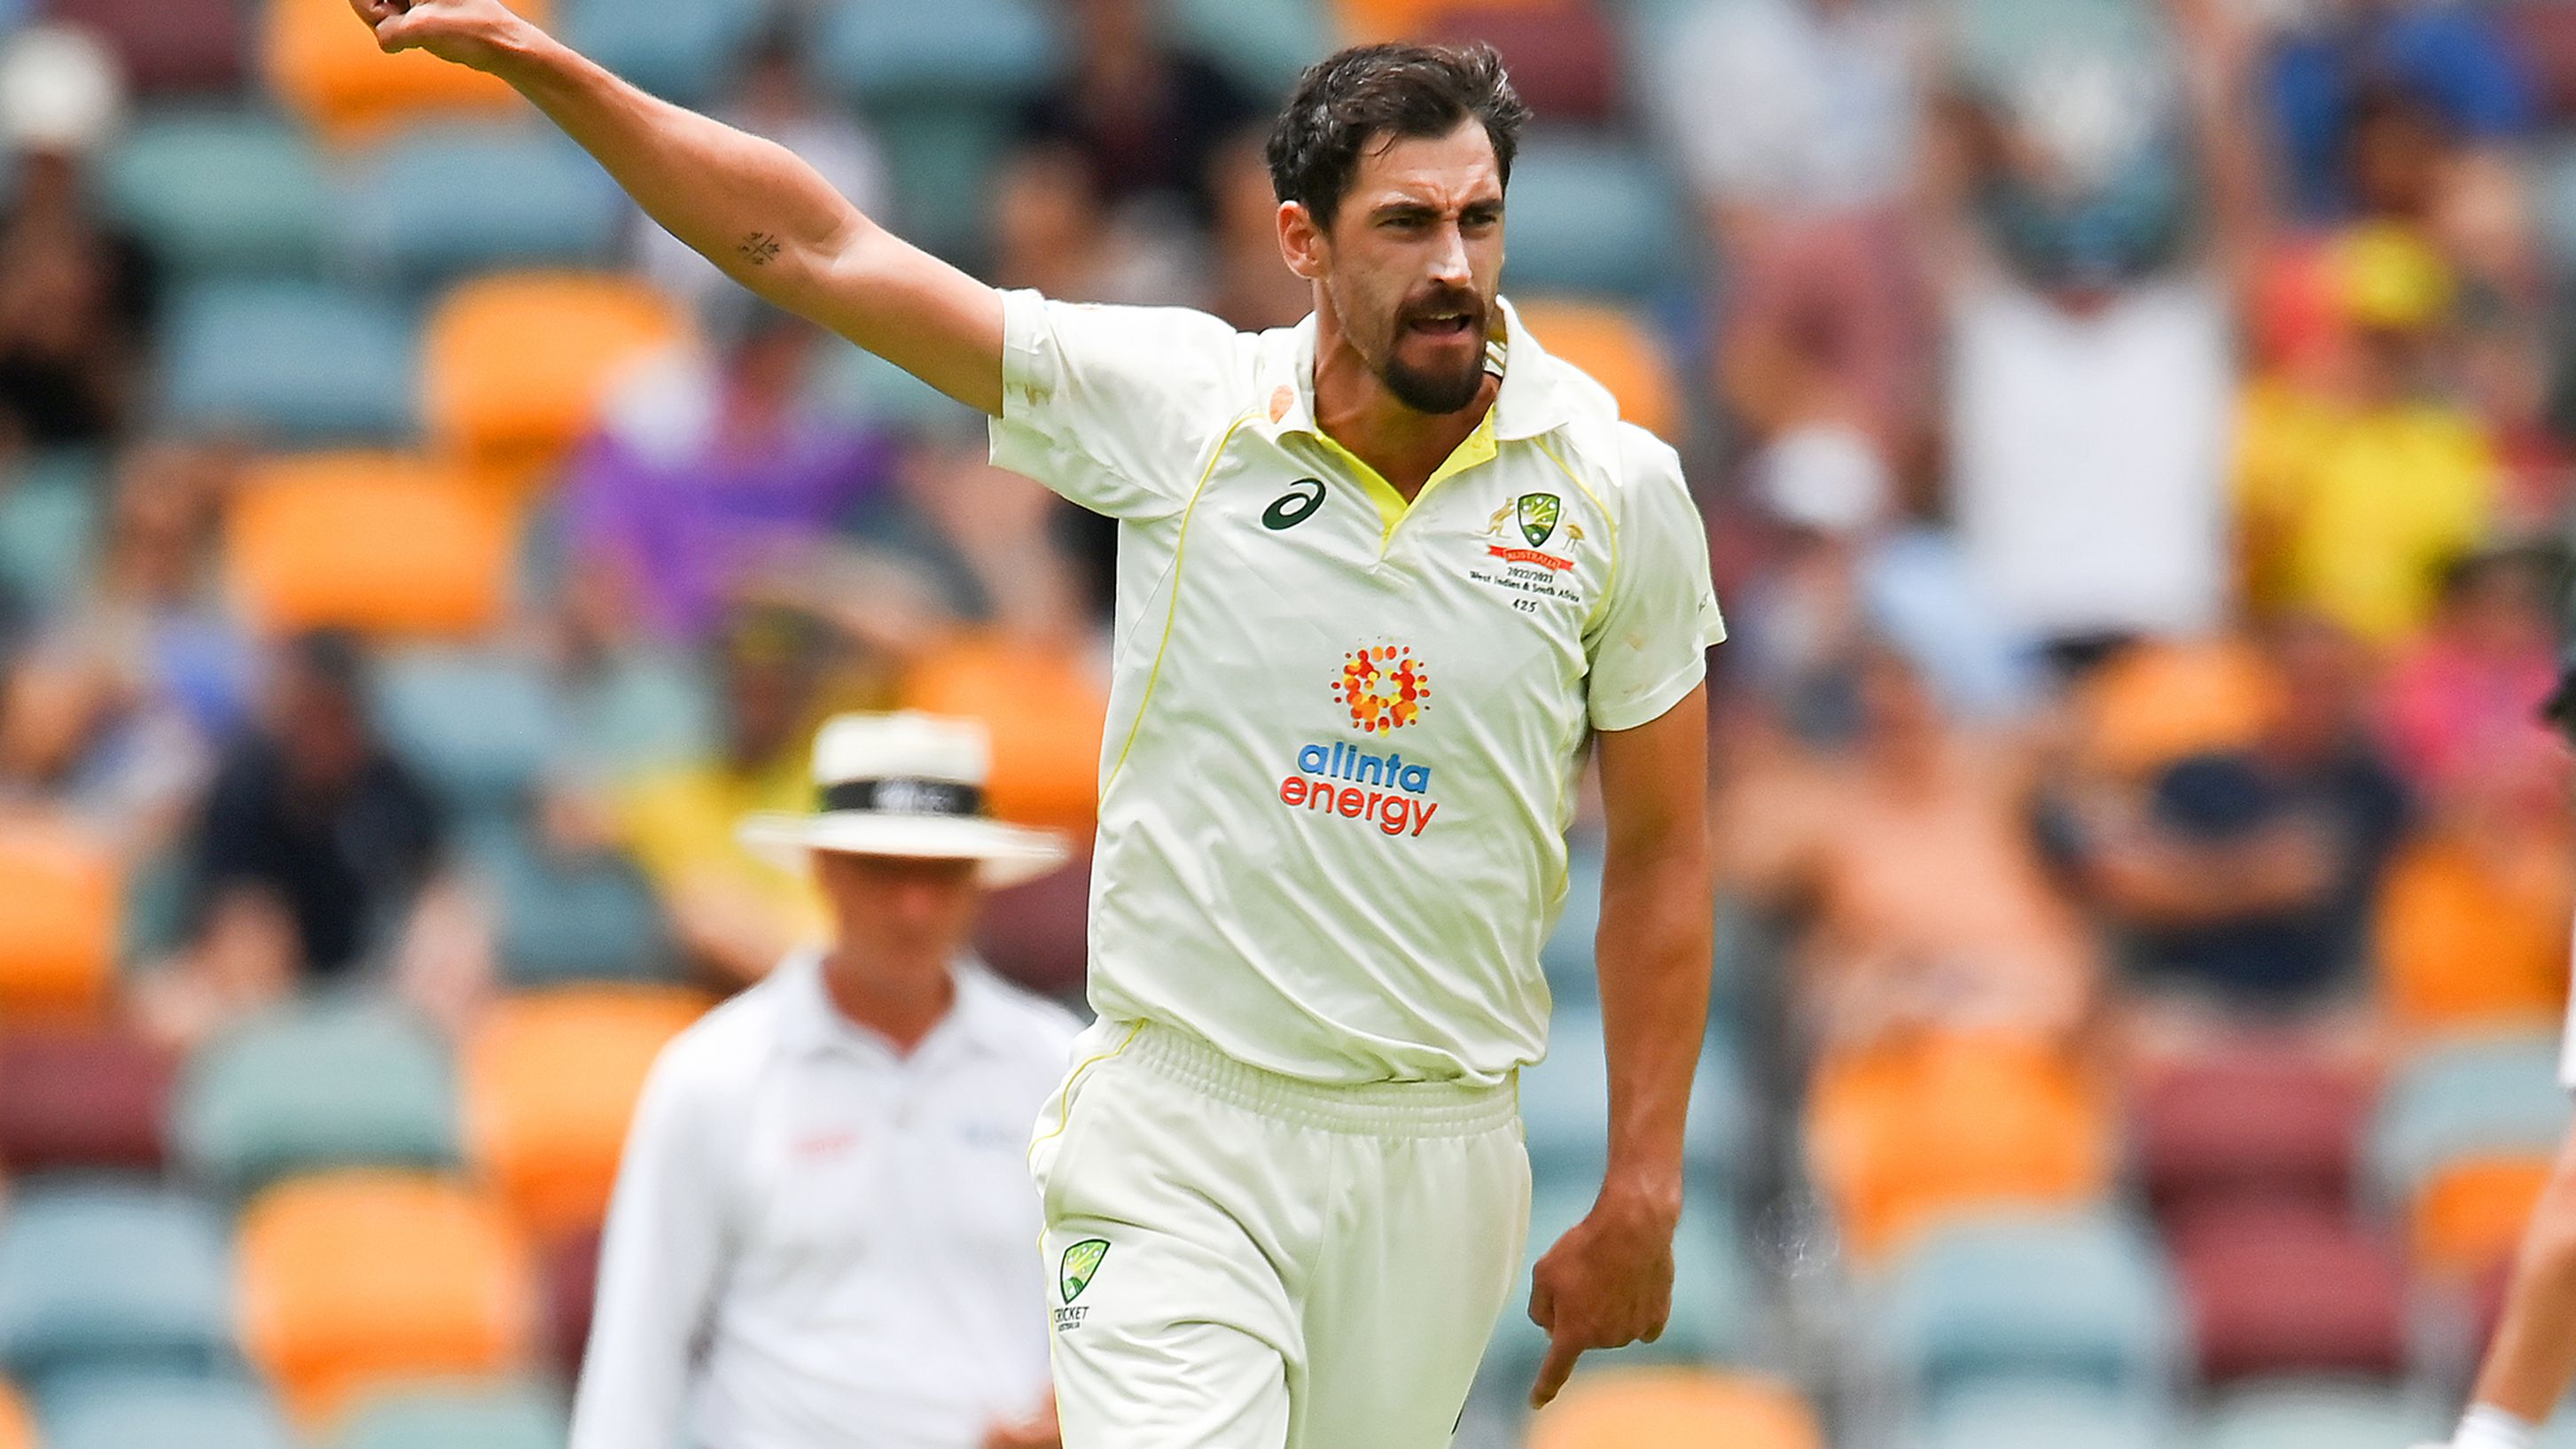 'Superstar' Mitchell Starc joins exclusive club with 300th Test wicket for Australia